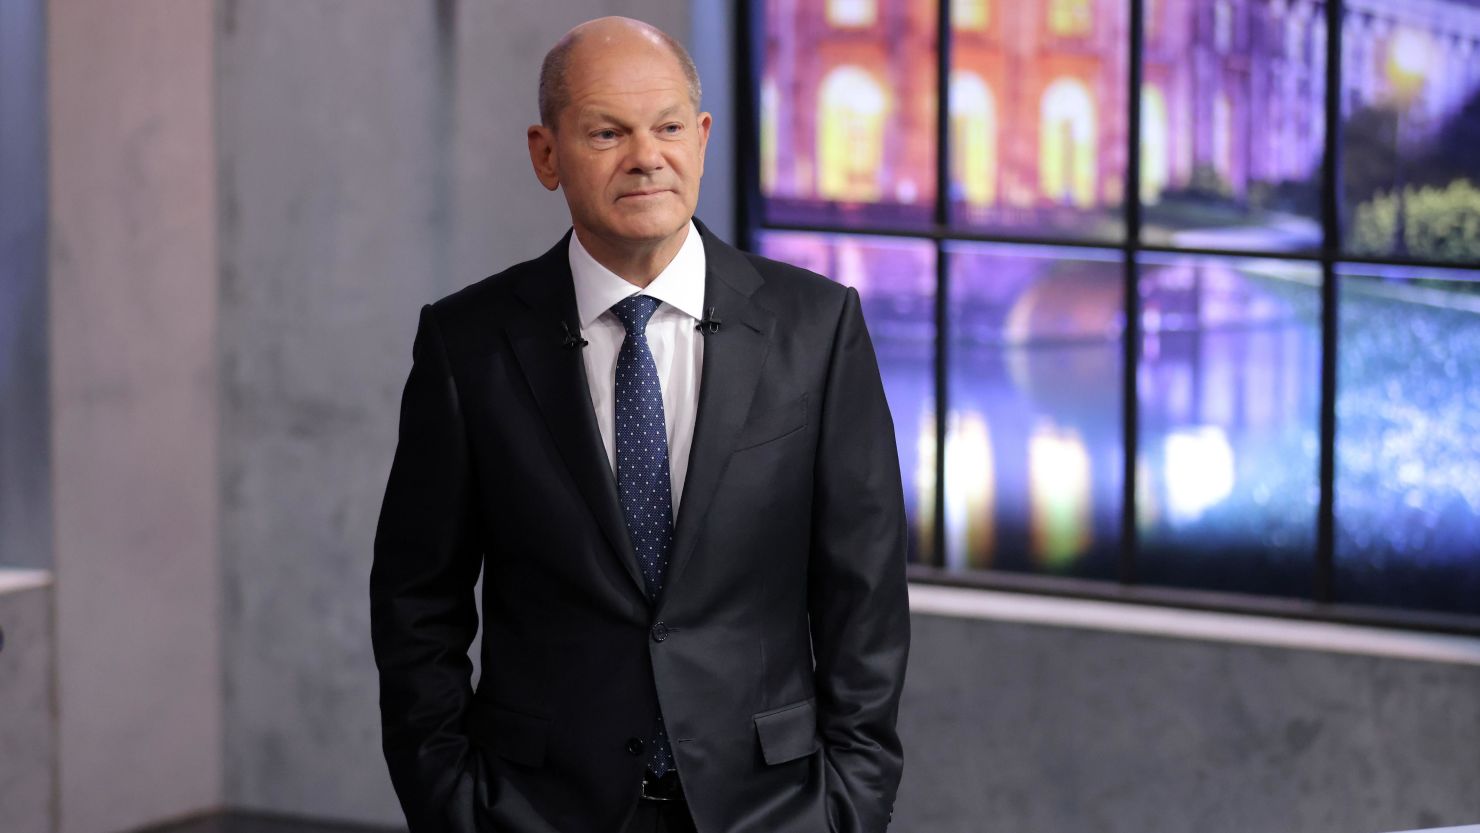 Chancellor candidate Olaf Scholz of the German Social Democrats (SPD) arrives to the final "Triell" televised debate on September 19, 2021 in Berlin, Germany. 